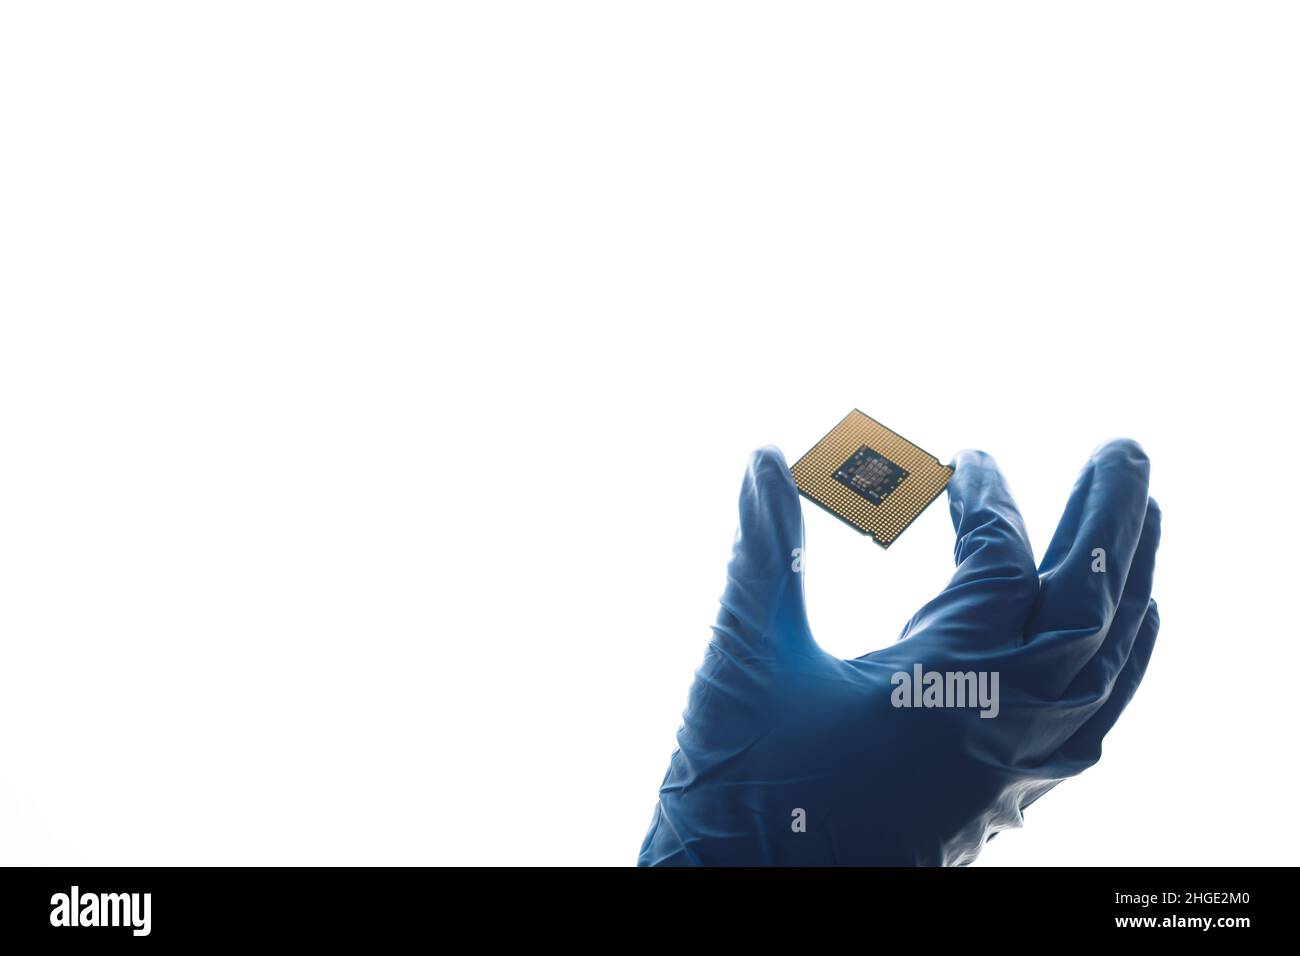 Hand in blue glove holding computer microchip Stock Photo